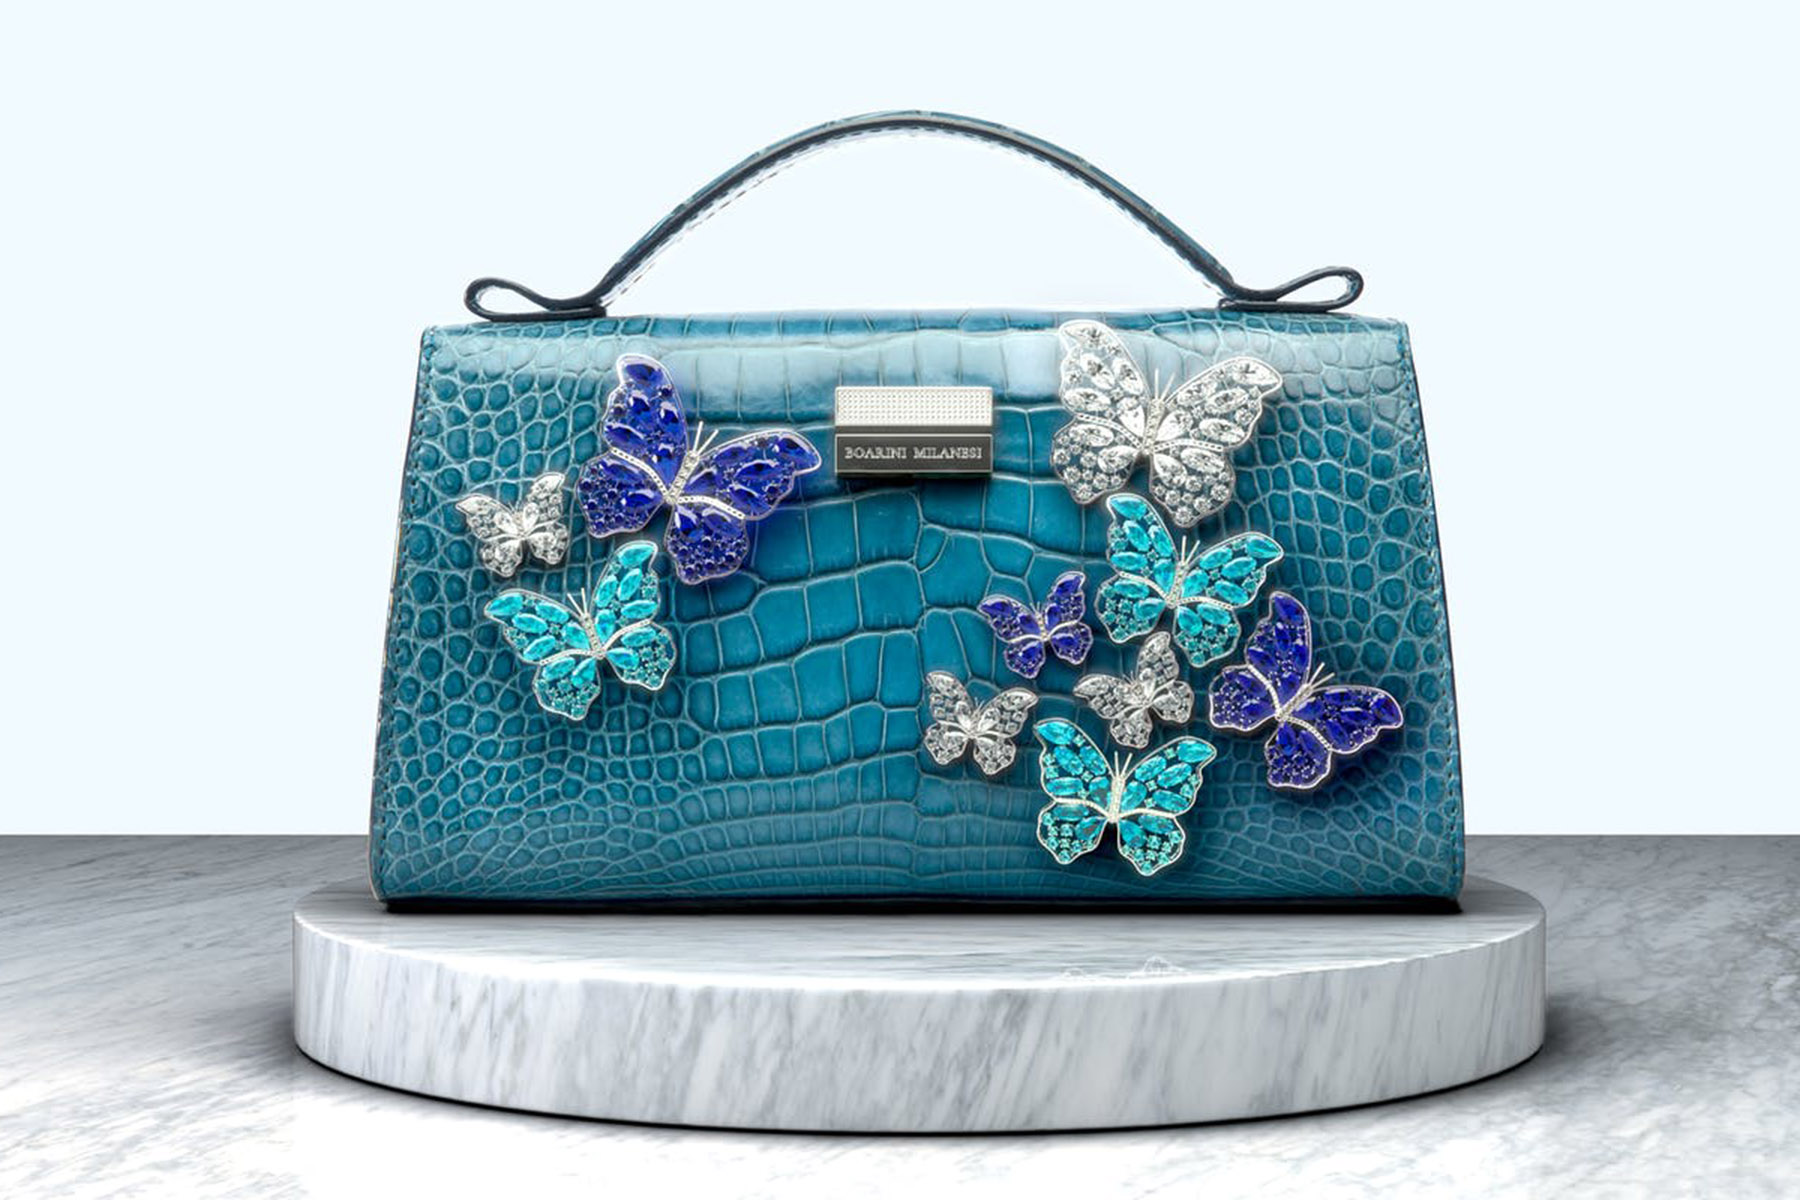 These Are The Most Expensive Handbags In The World-demhanvico.com.vn